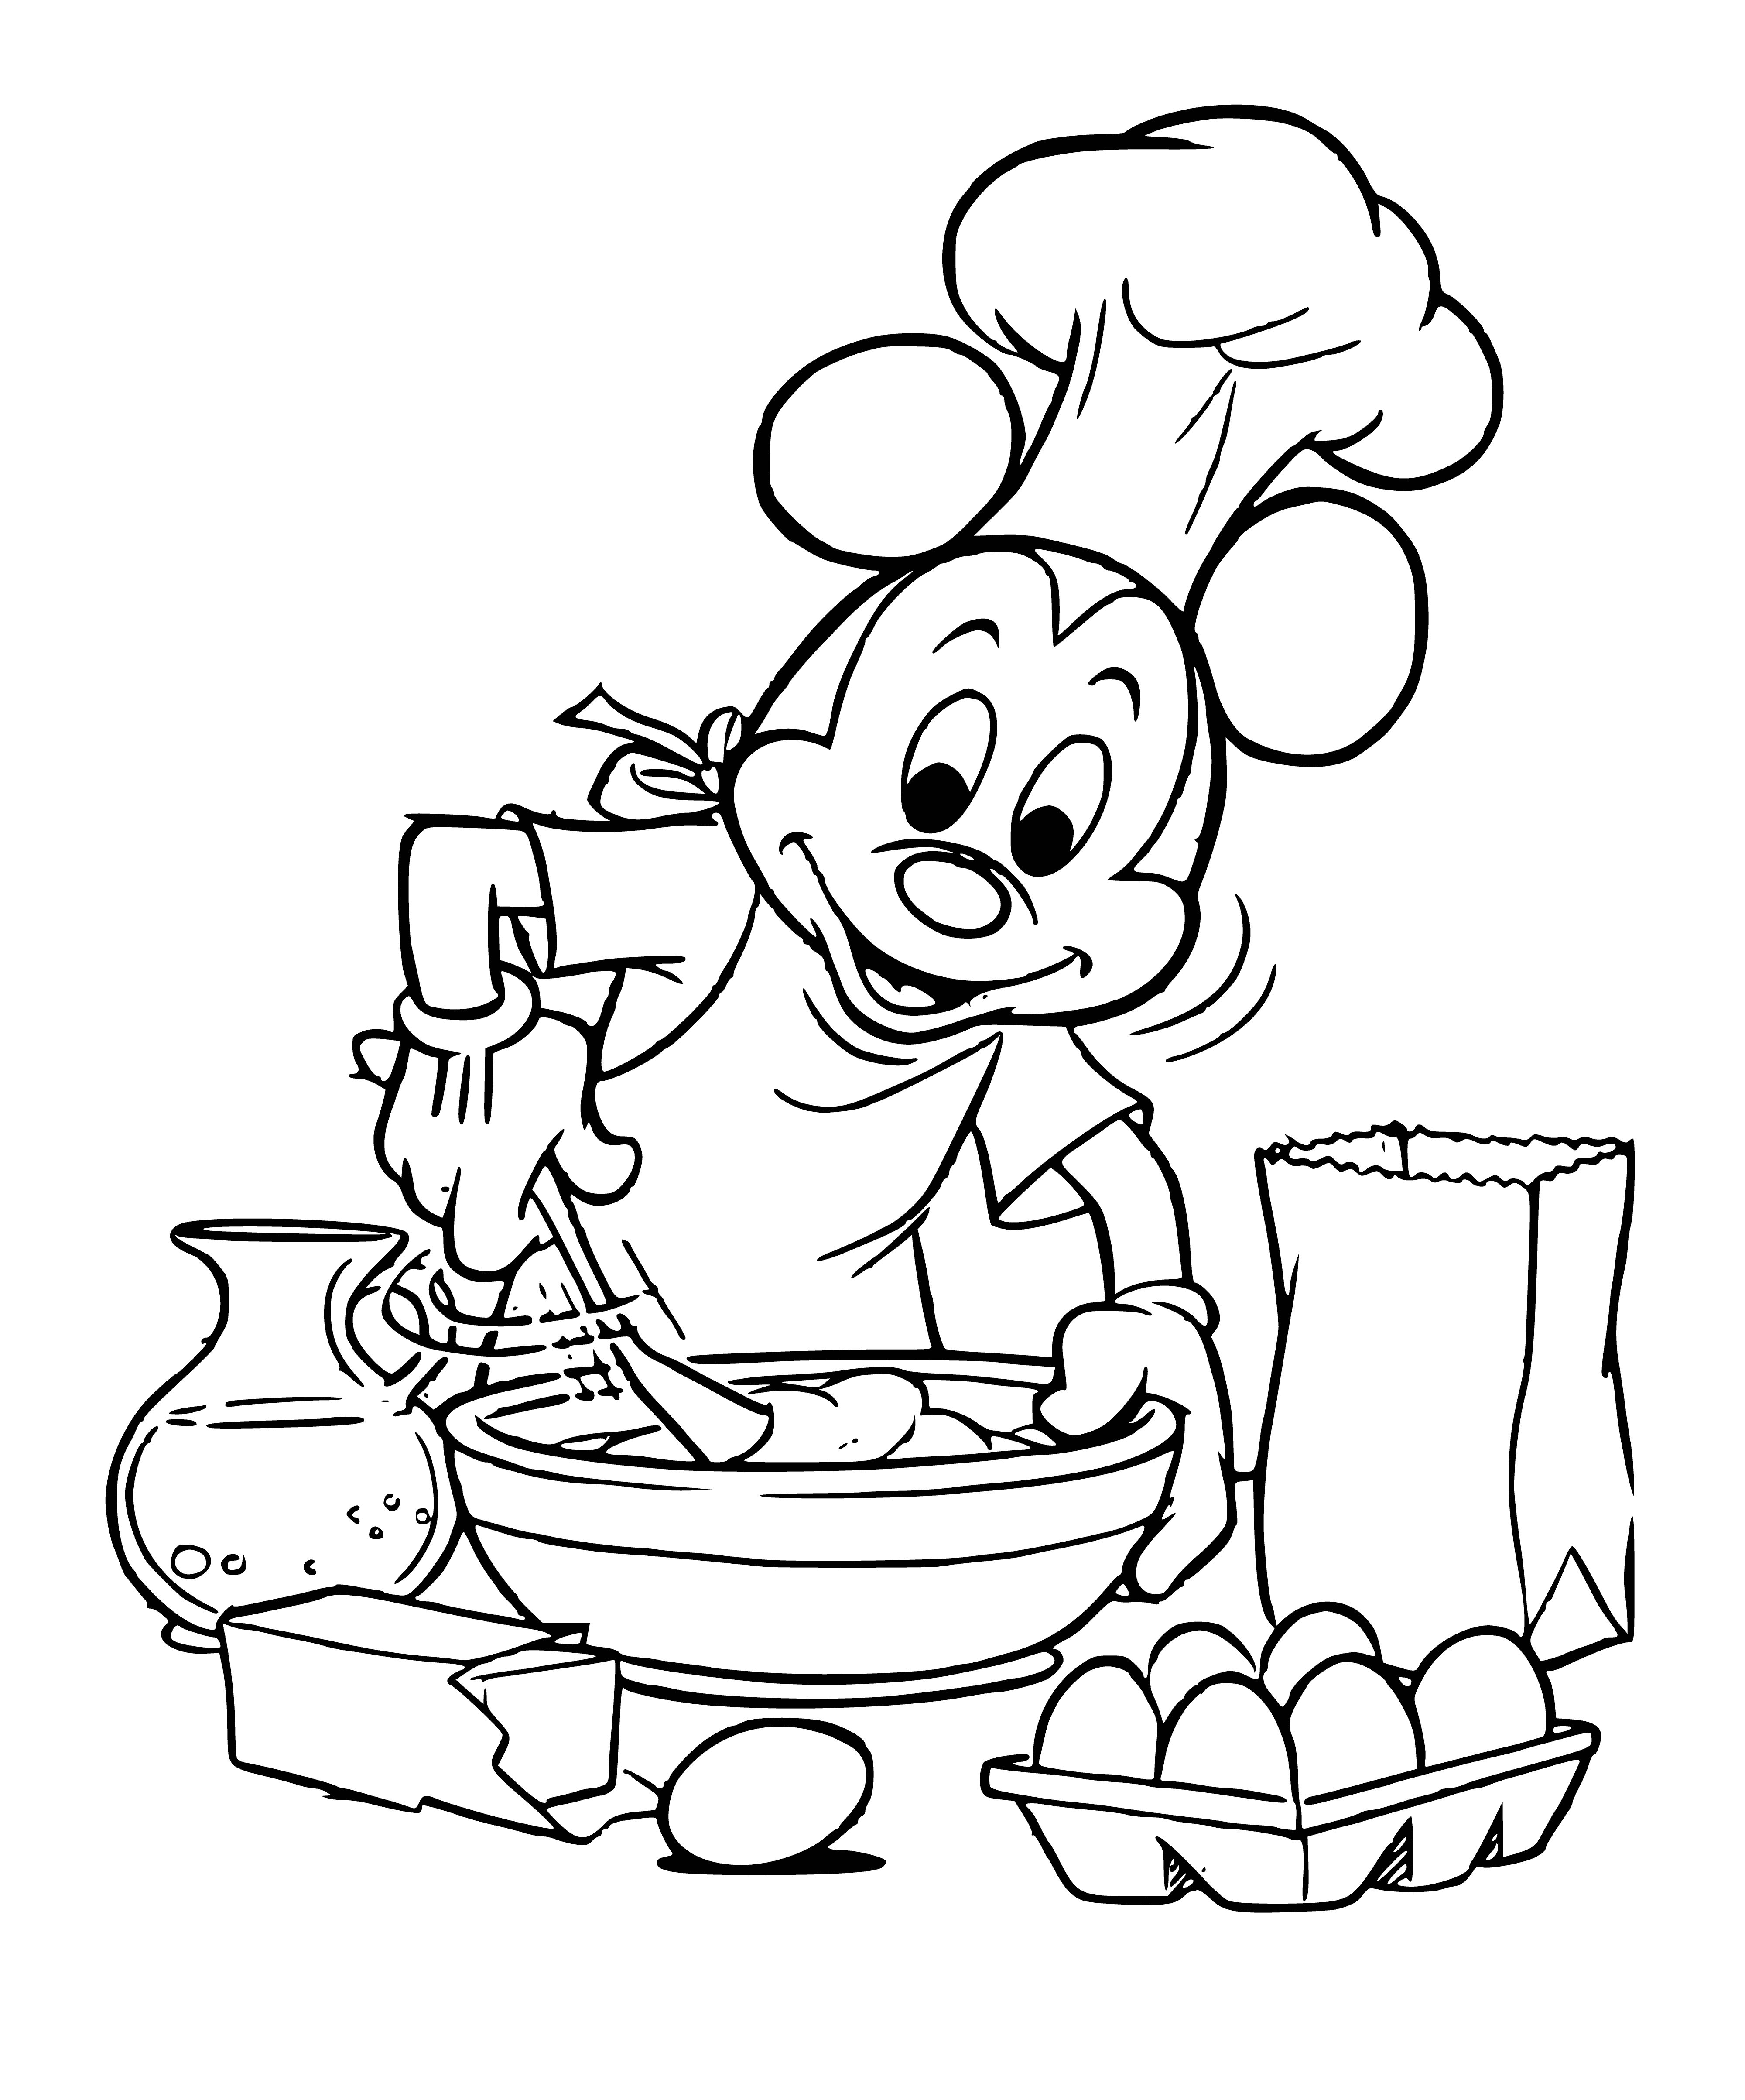 Mickey the chef coloring page